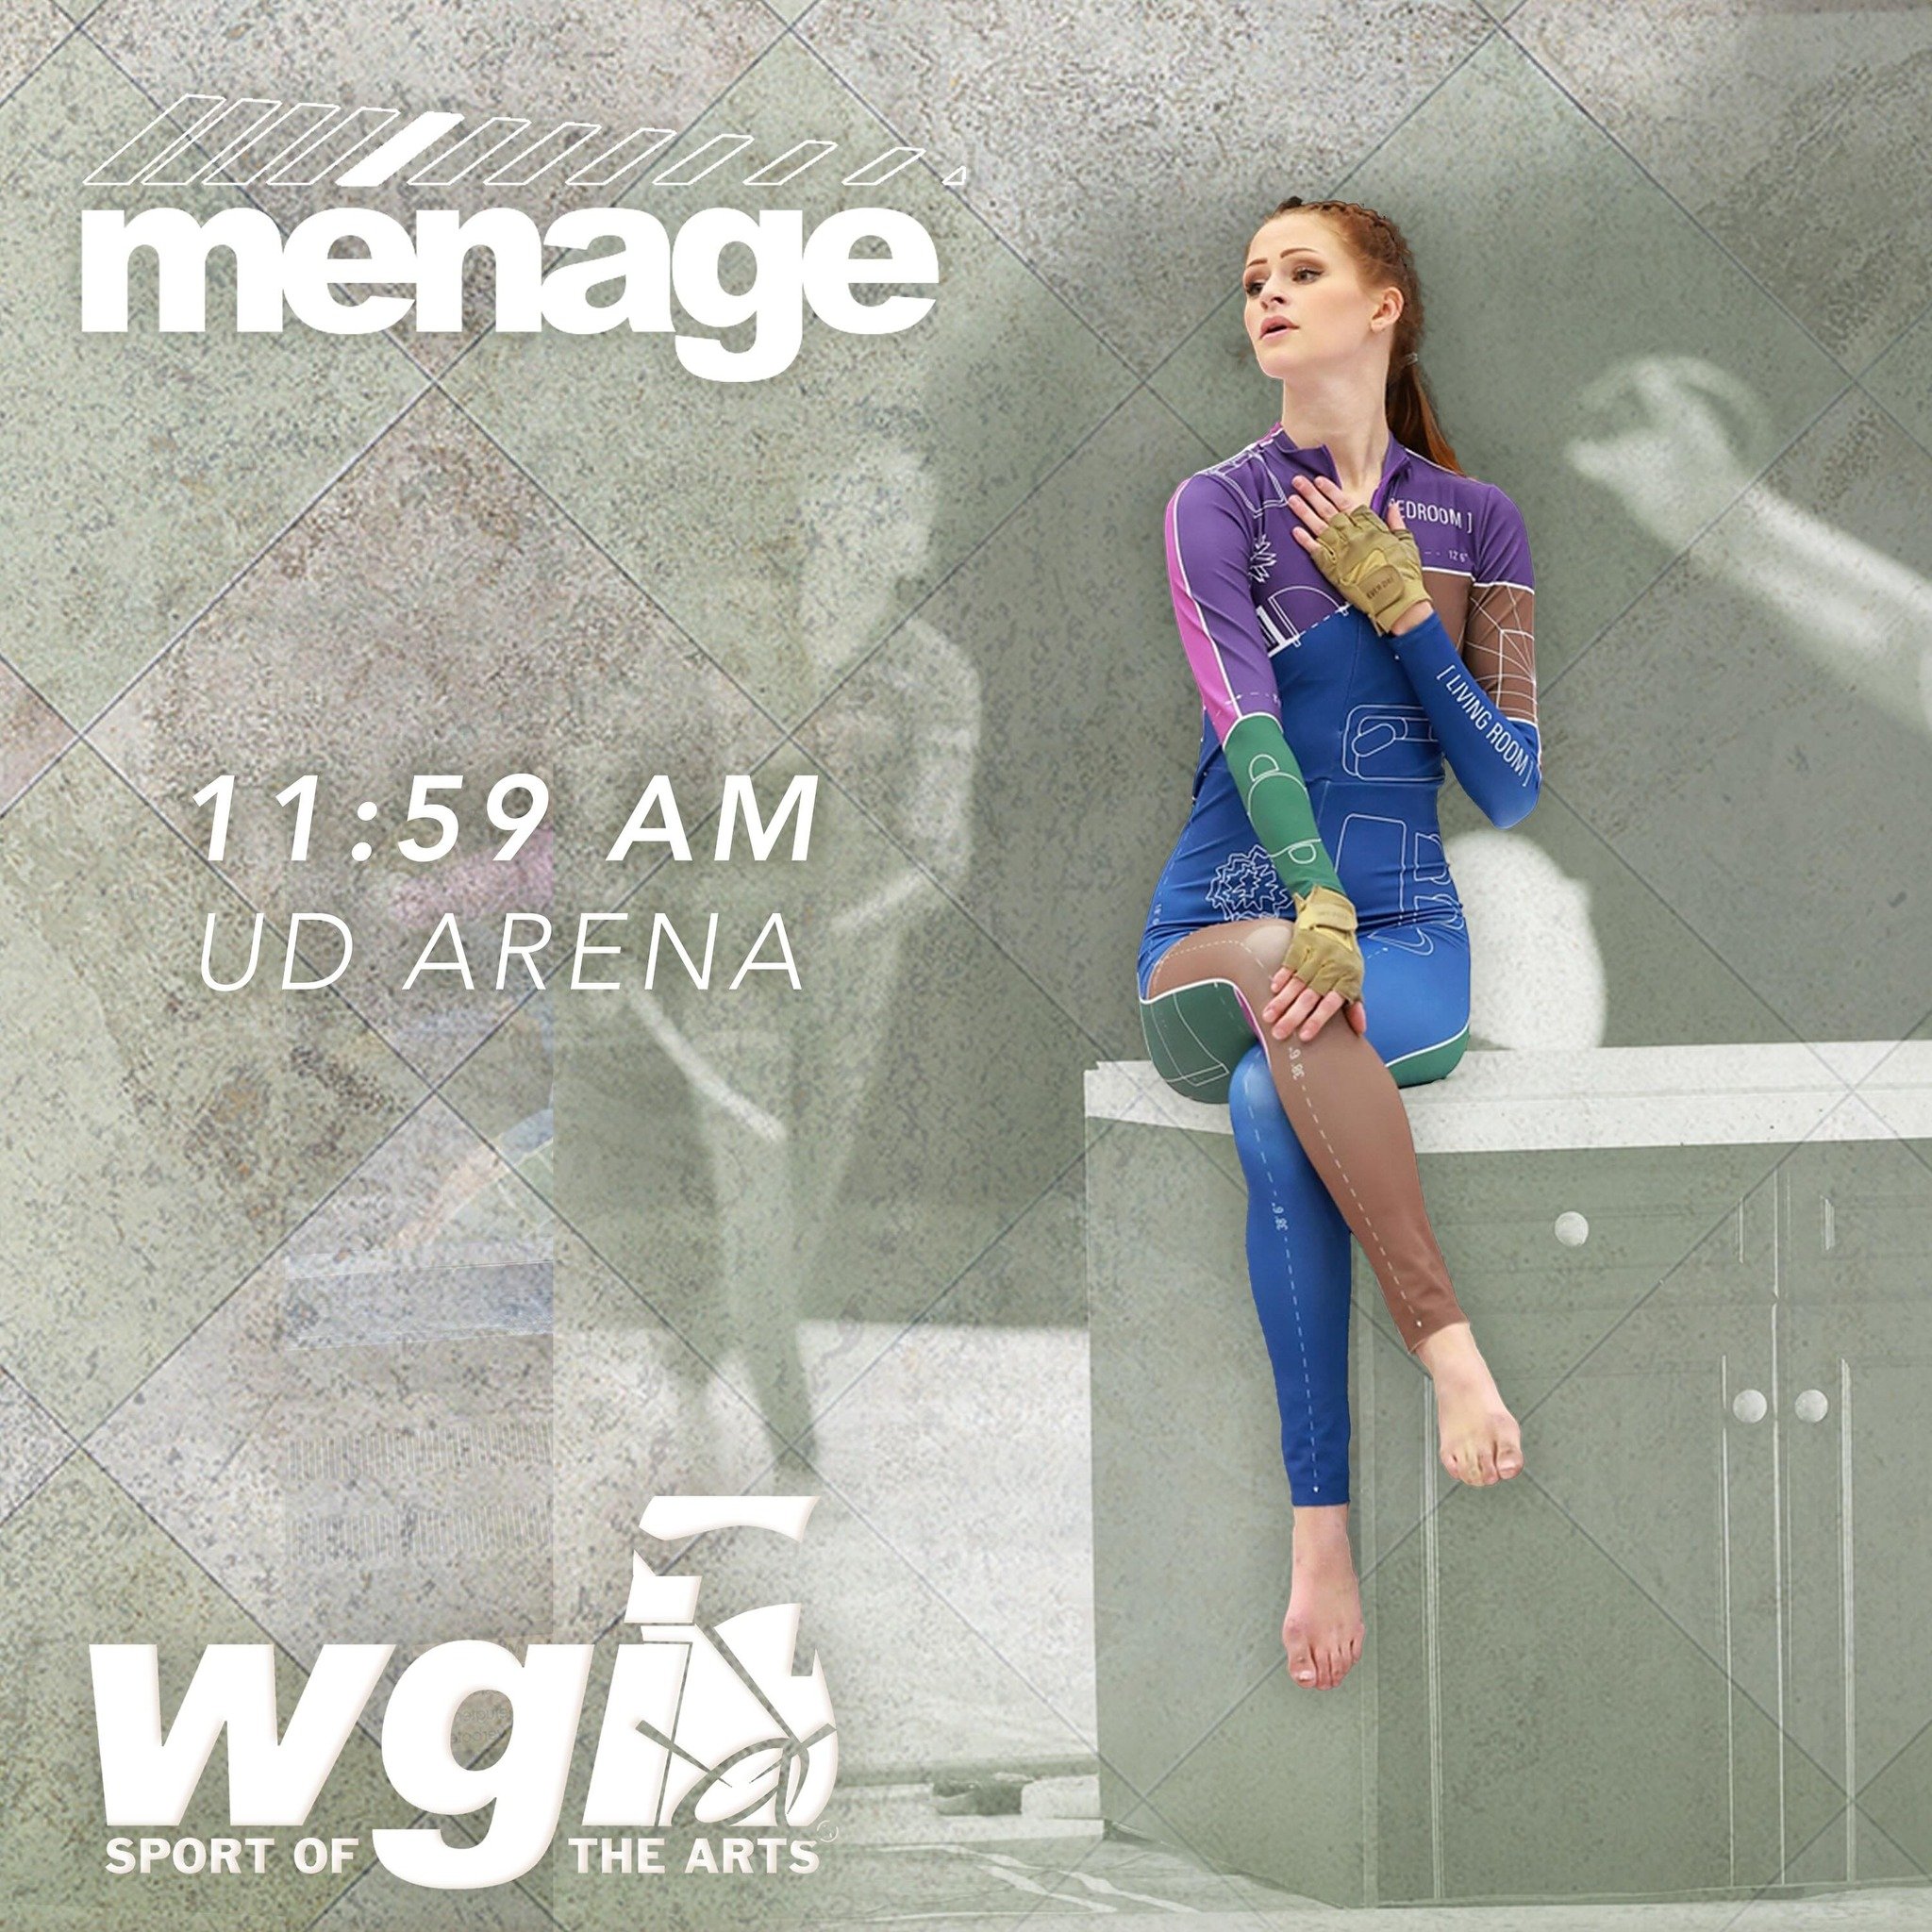 And it all starts &ldquo;In The Kitchen&rdquo; tomorrow. M&eacute;nage is performing at 11:59AM in the UD Arena!